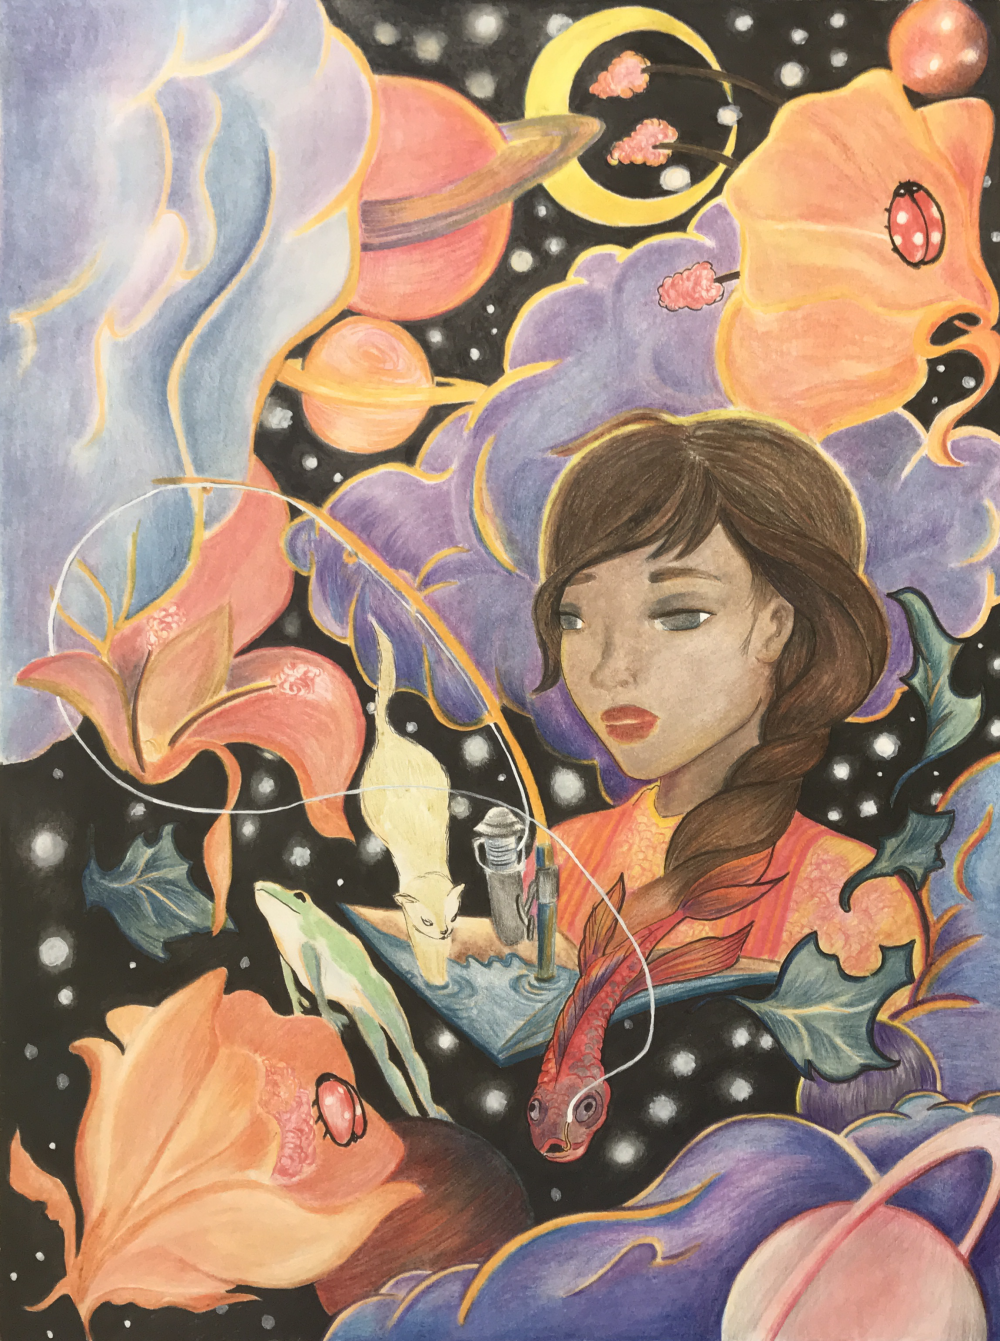 Flowers, planets, clouds and ladybugs in the foreground as well as middleground. Girl with magical book. A fishing pole is coming out of the book as a cat jumps " Connected to the pole is a beta-fish that weaves its fin into the girl's hair. A frog jumps out from the middleground and the negative space is full of stars.